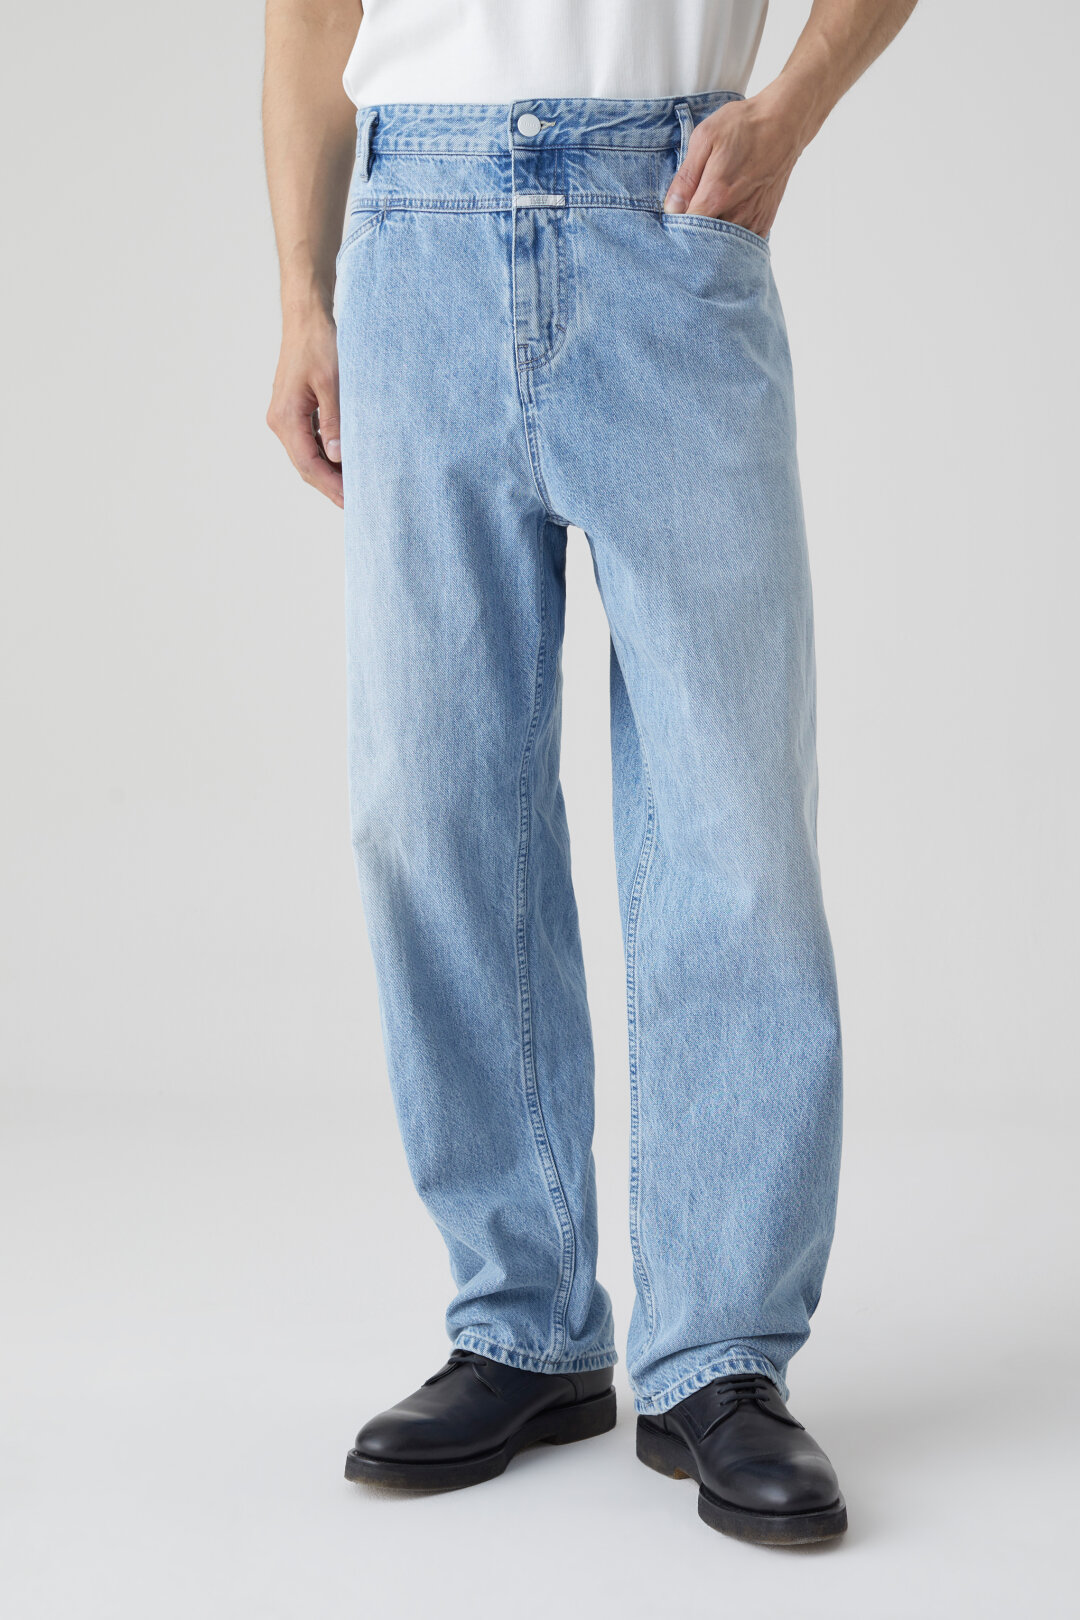 Closed X-Treme Loose Jeans in Light Blue